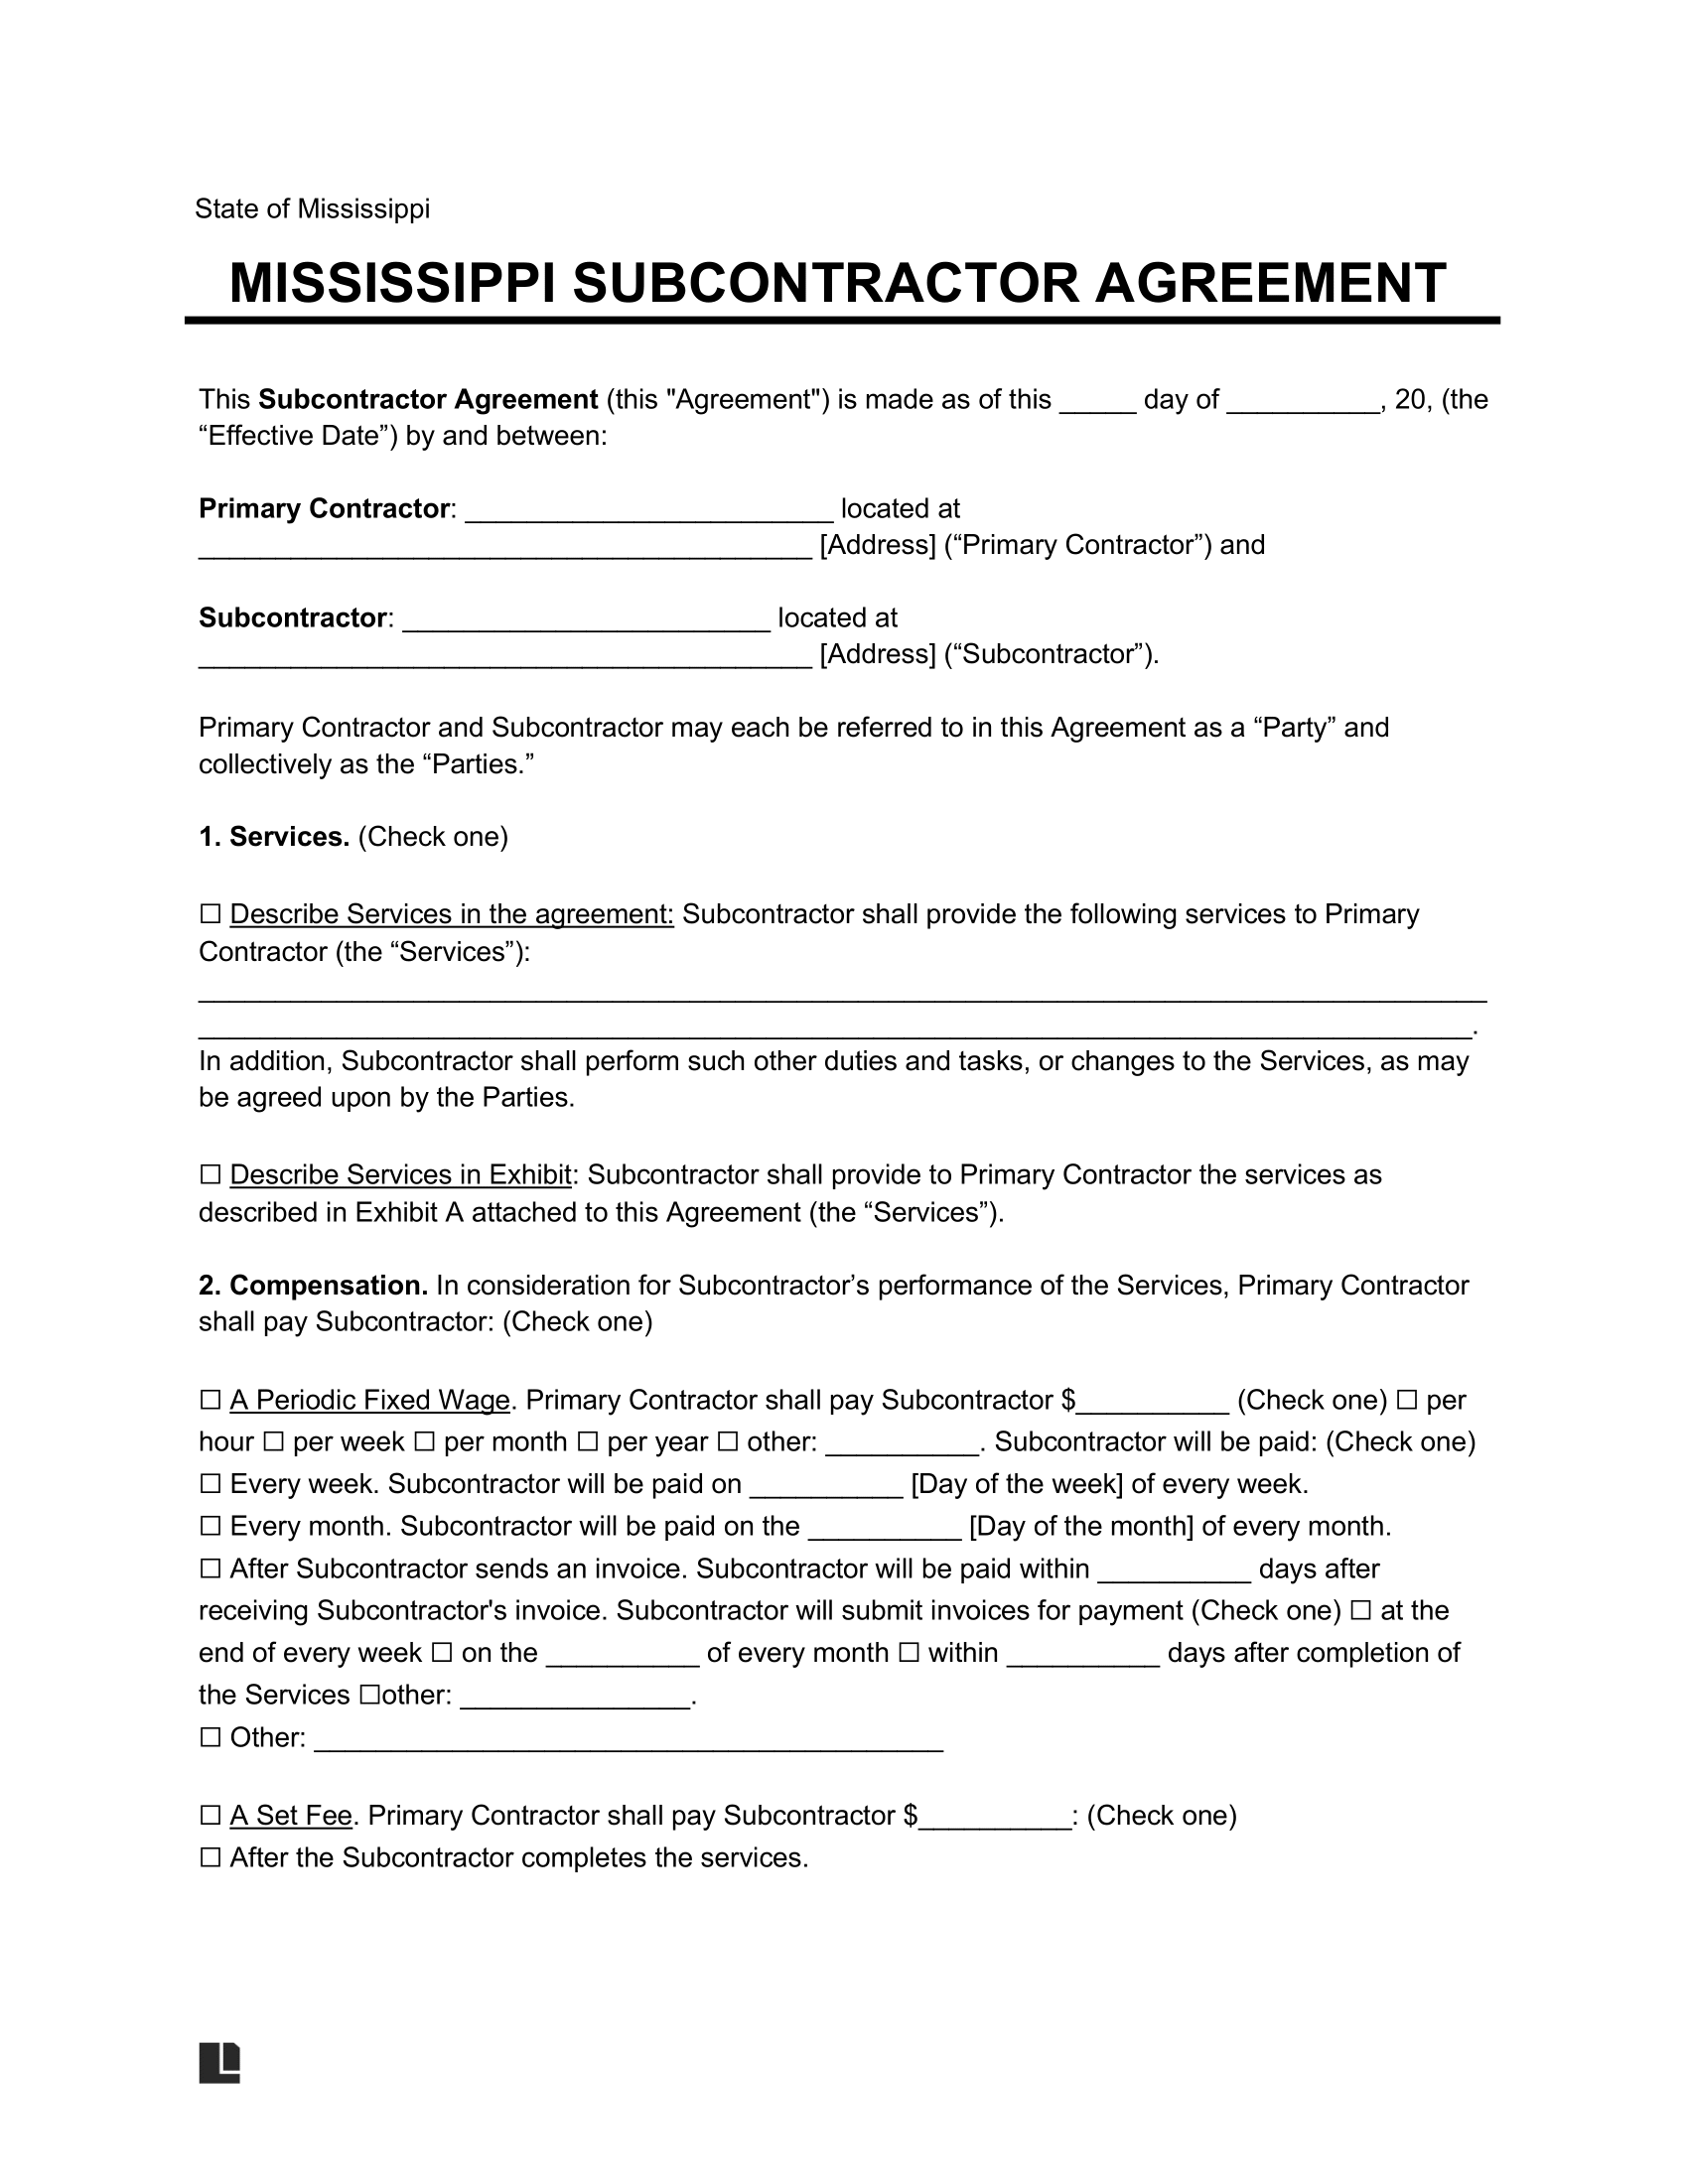 mississippi subcontractor agreement template